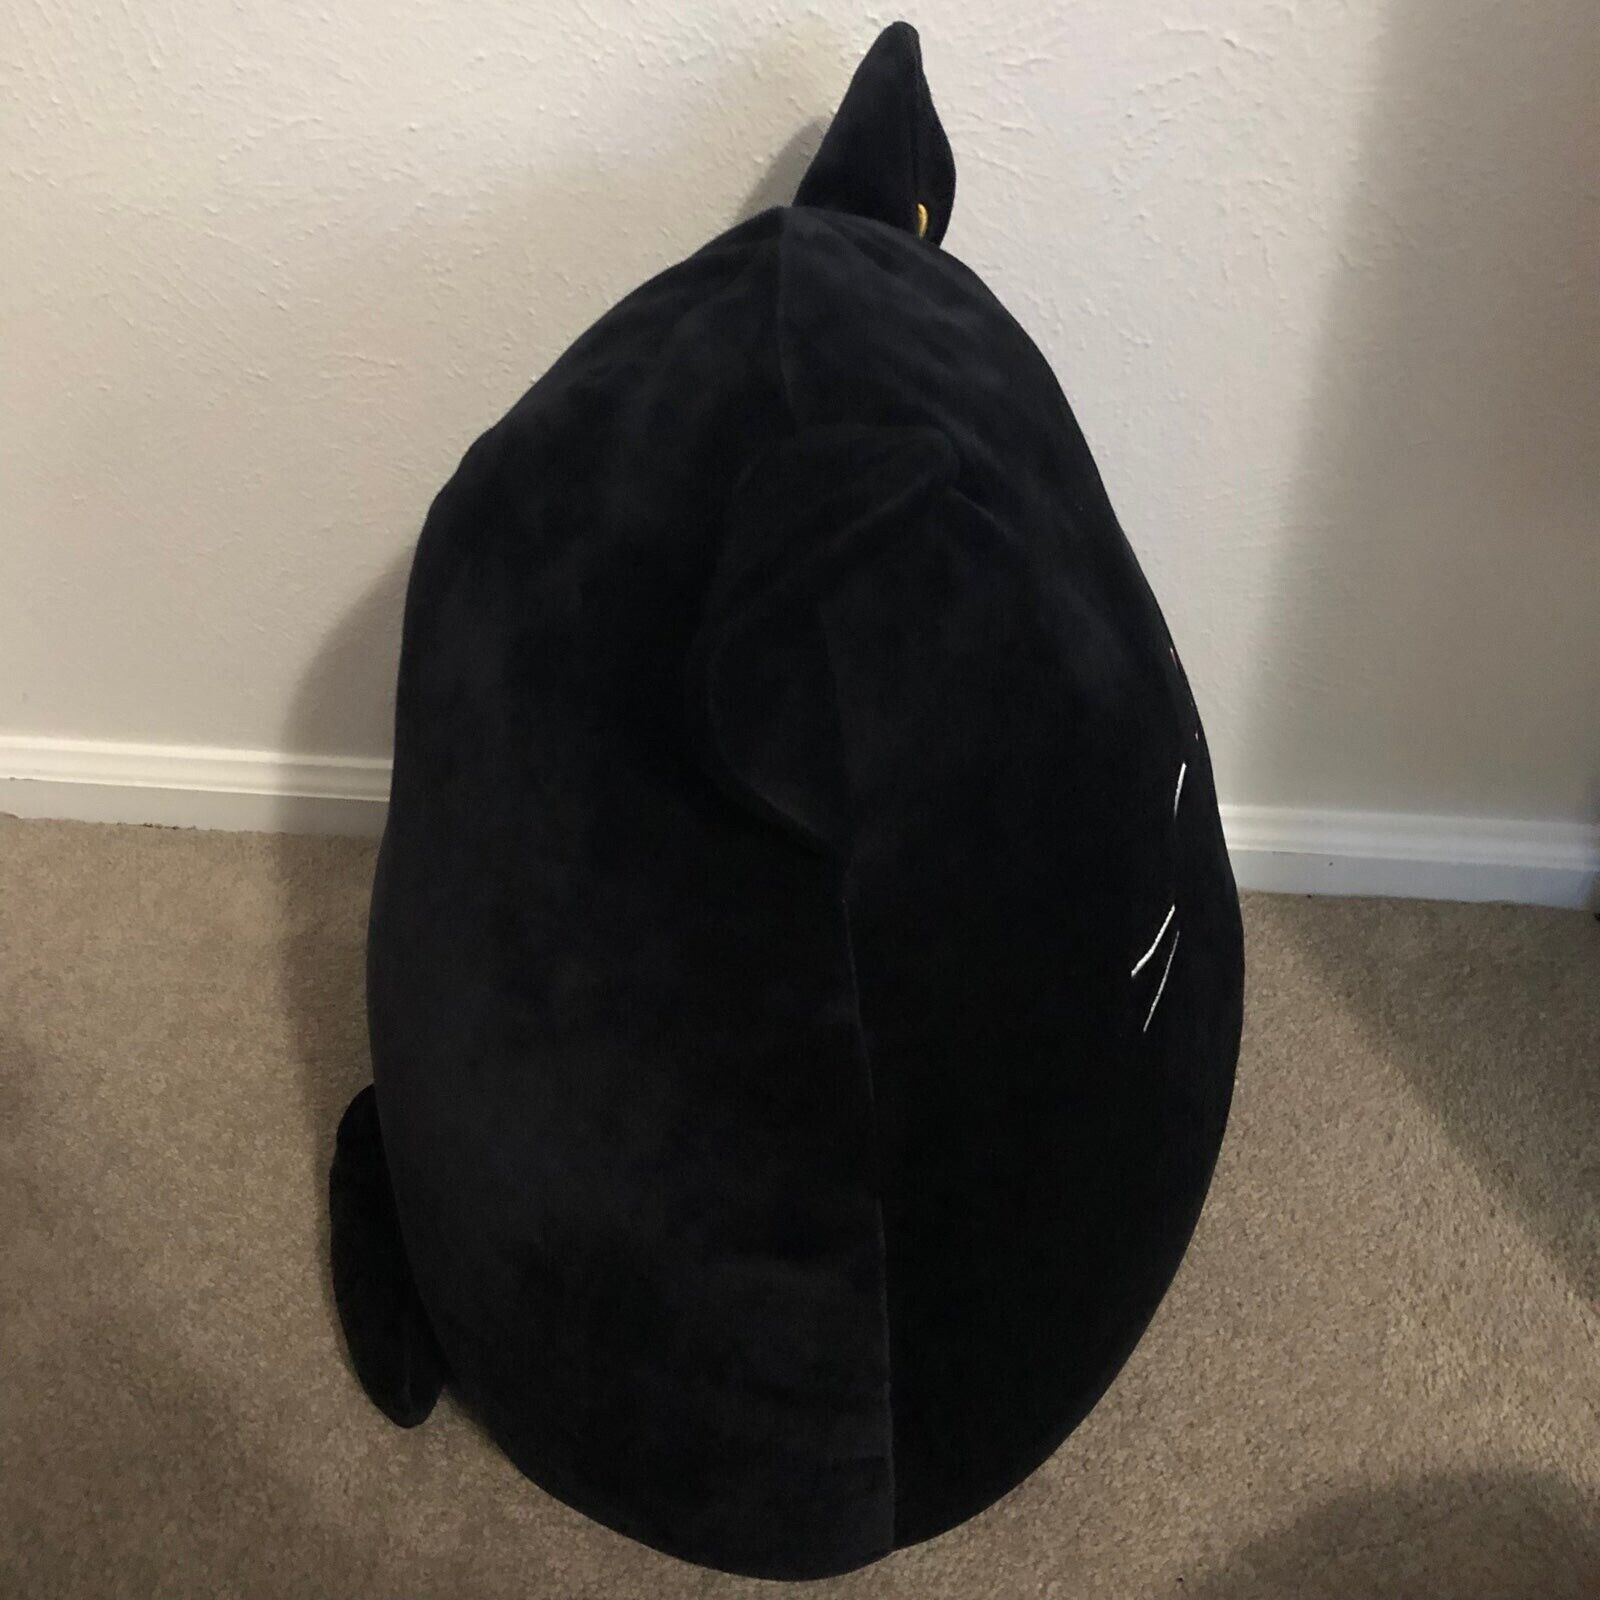 Jack The Black Cat 16” Squishmallow 1 Of 500 And Similar Items